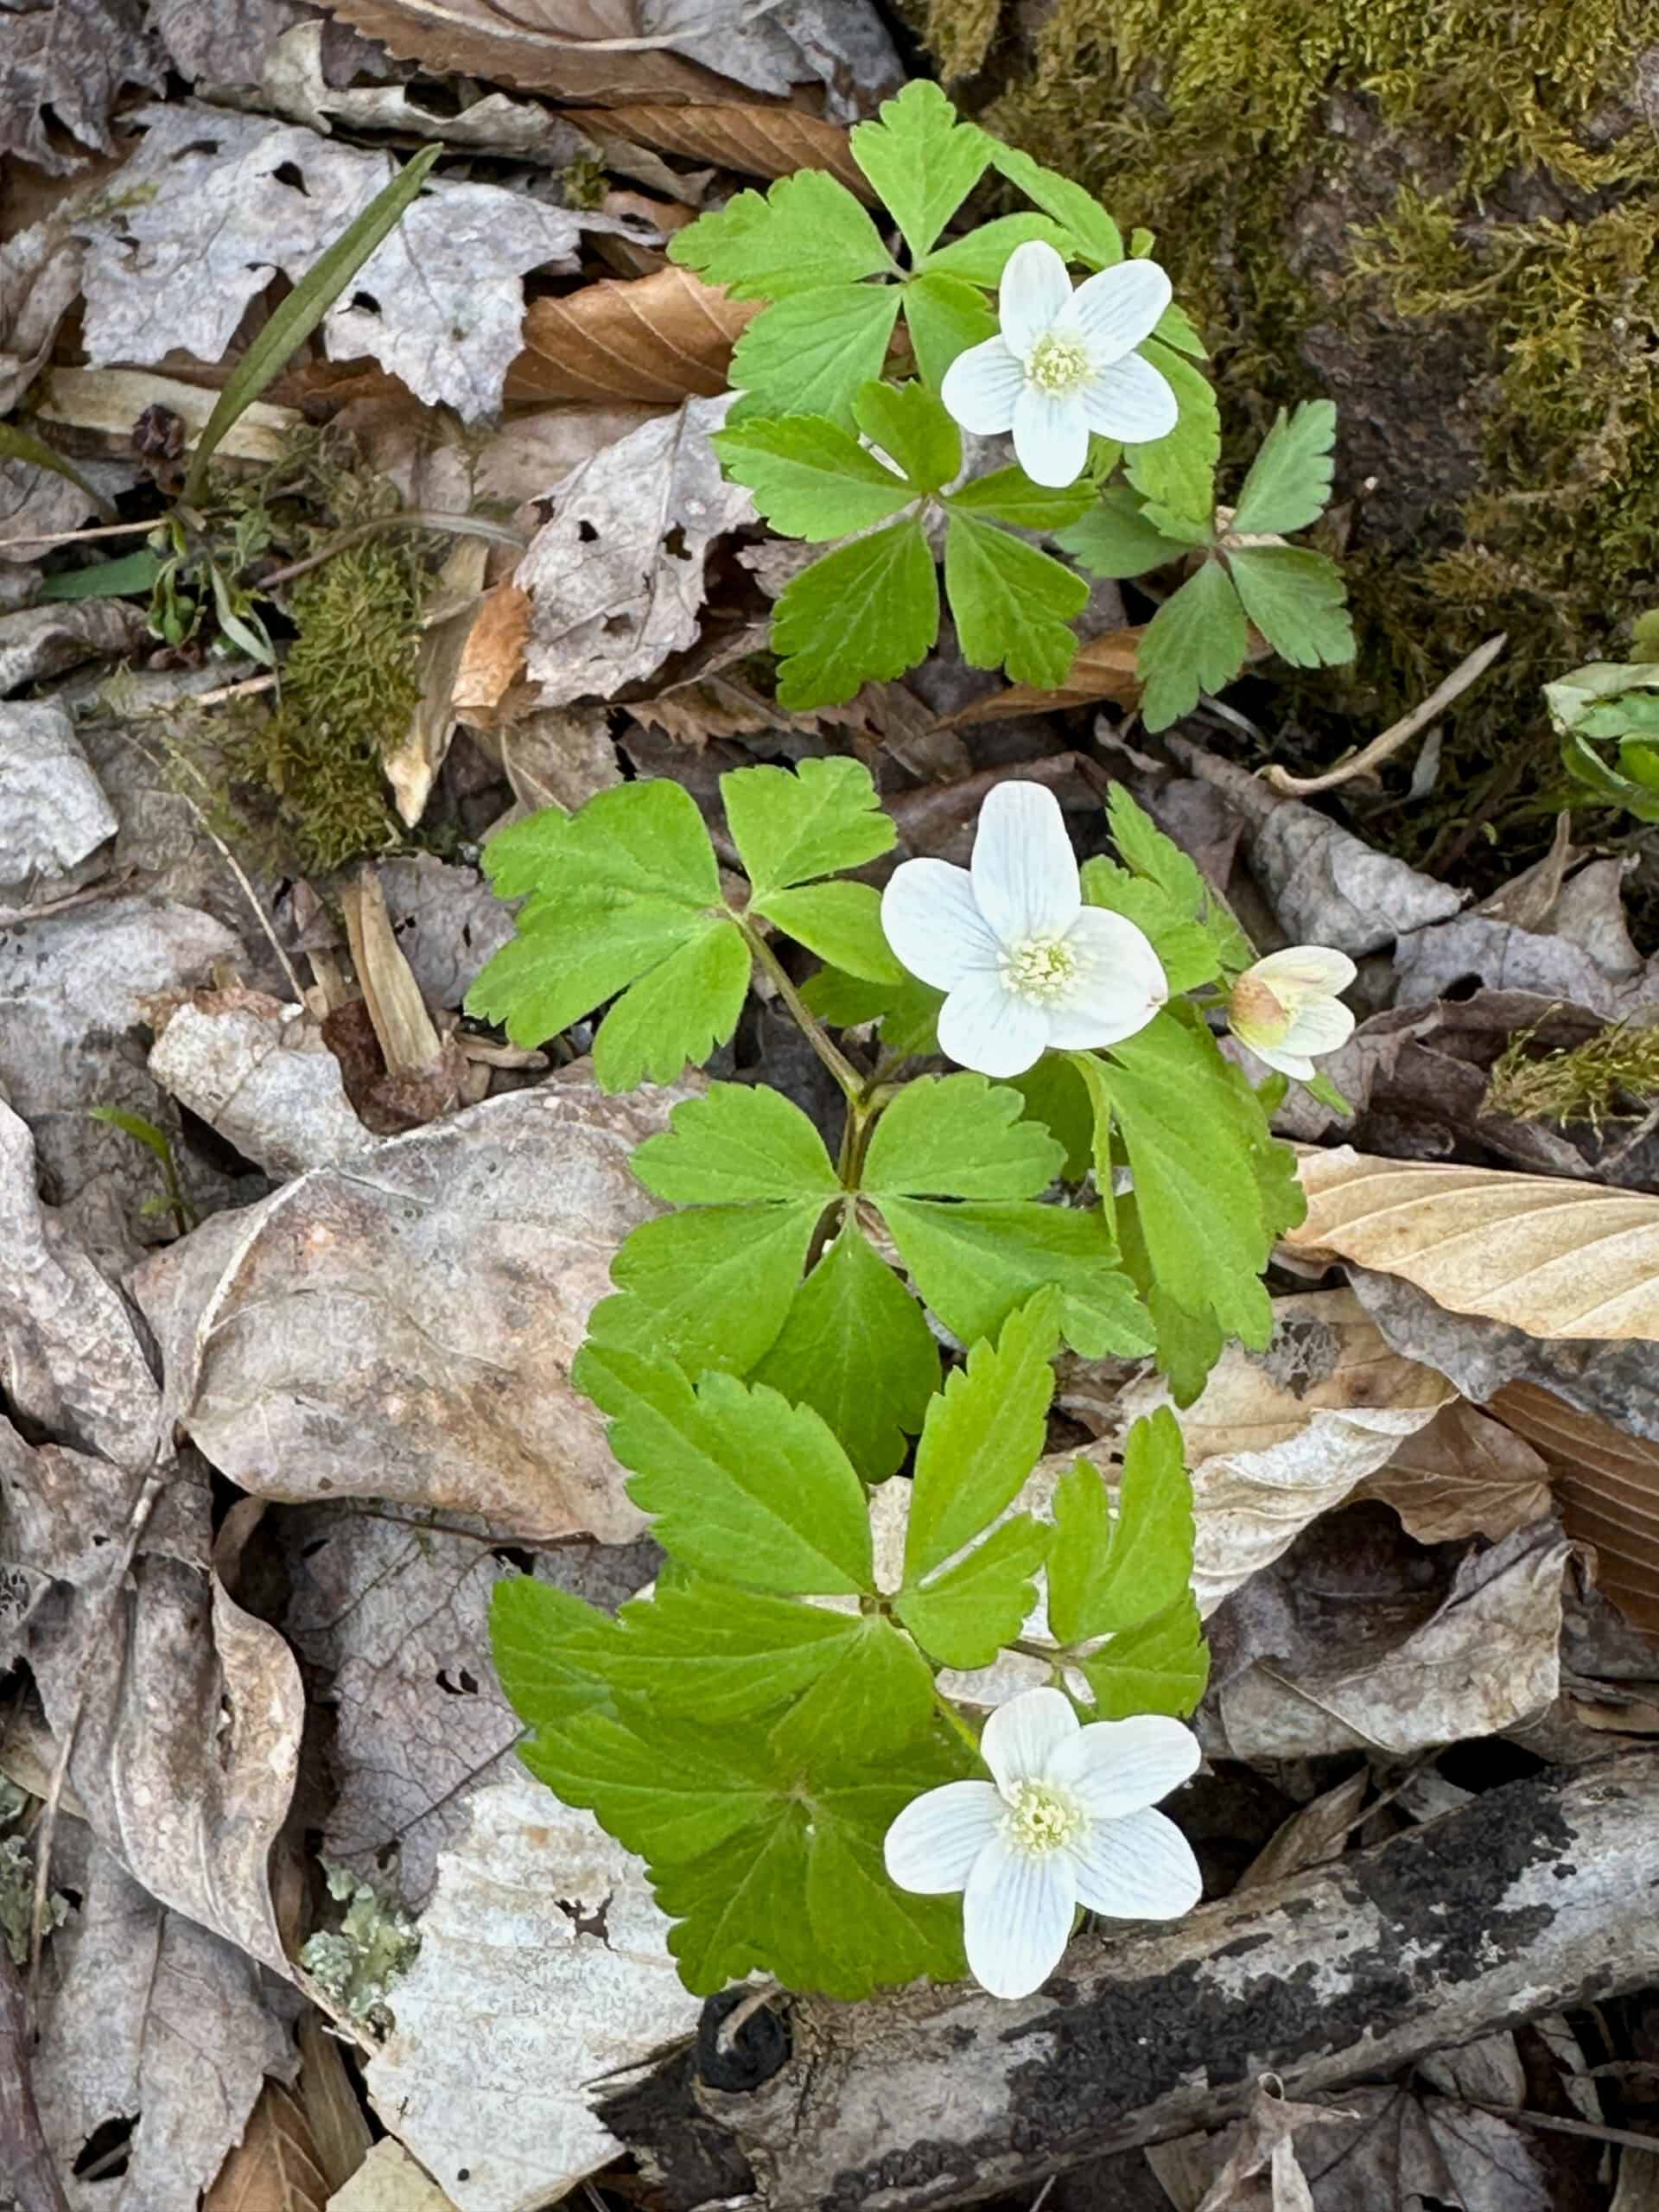 Small white 5-petaled flowers of wood anemone